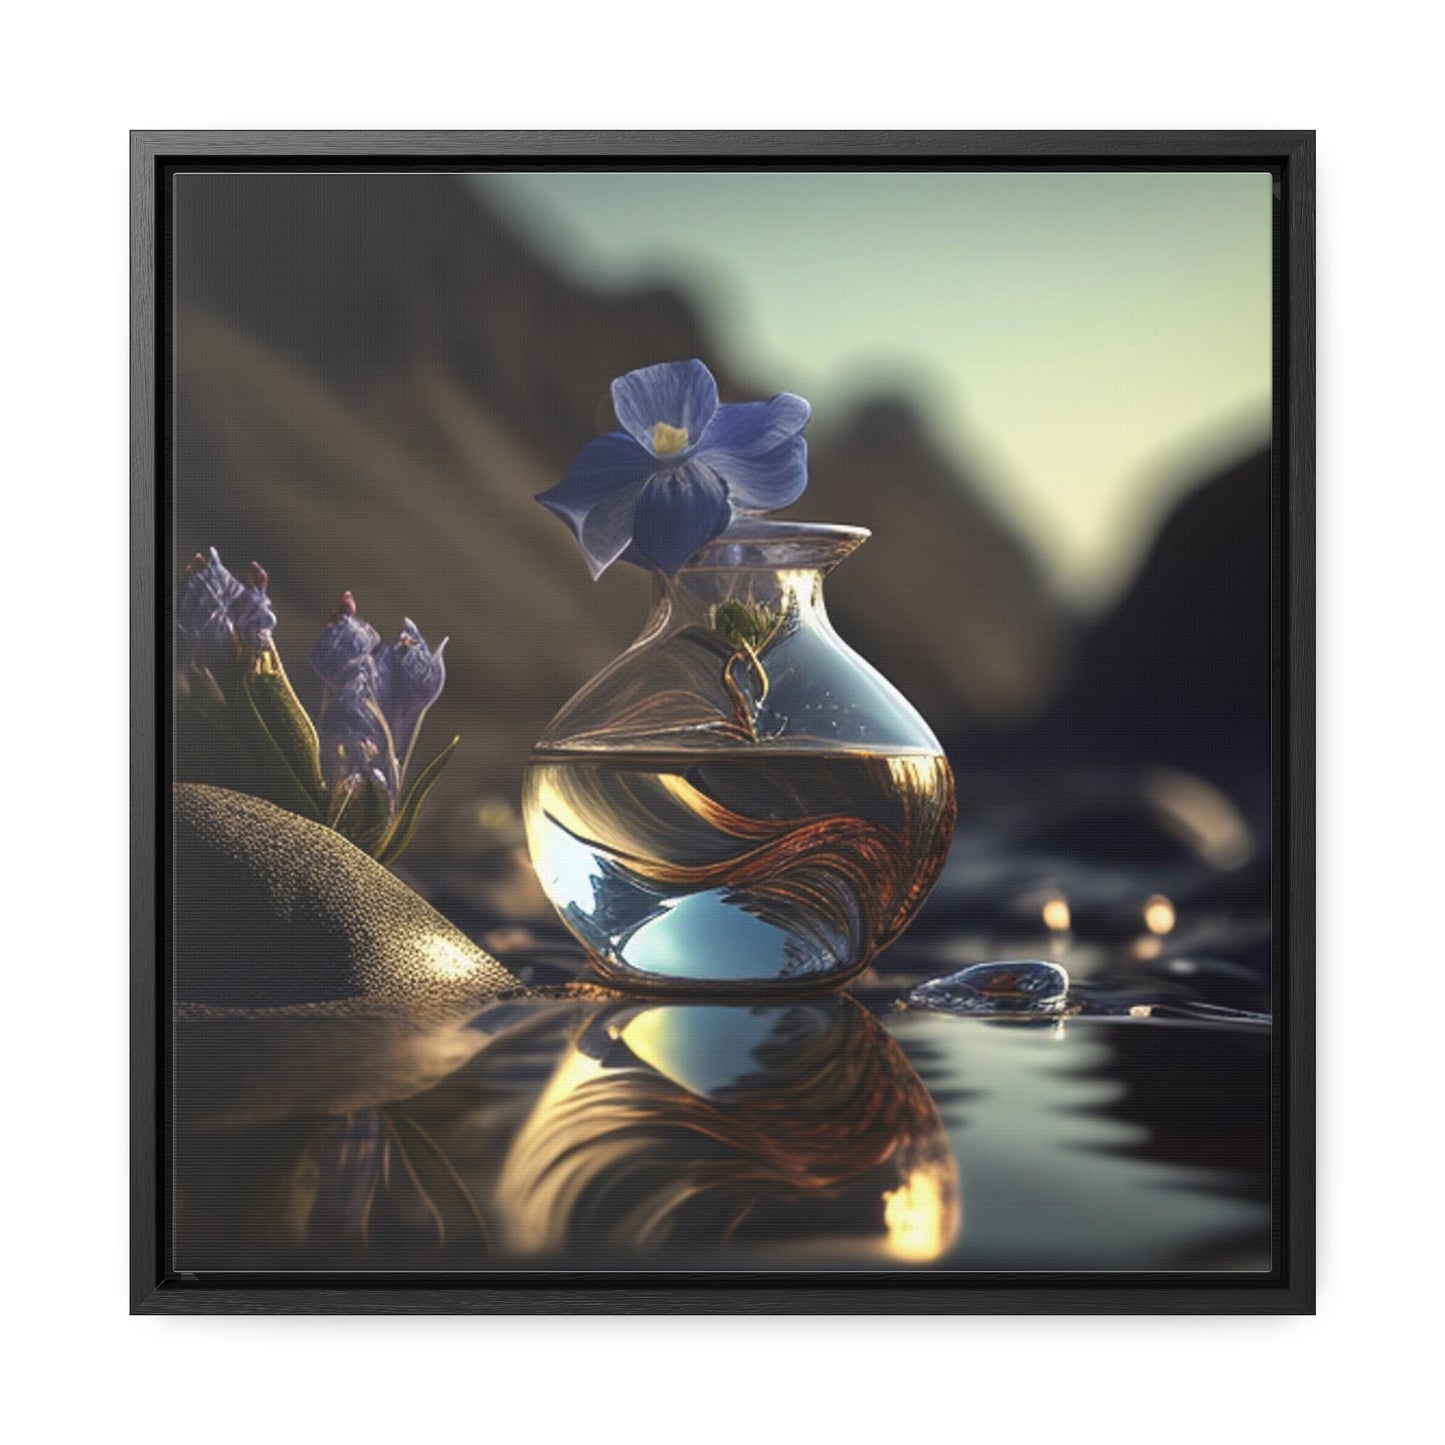 Gallery Canvas Wraps, Square Frame The Bluebell 1